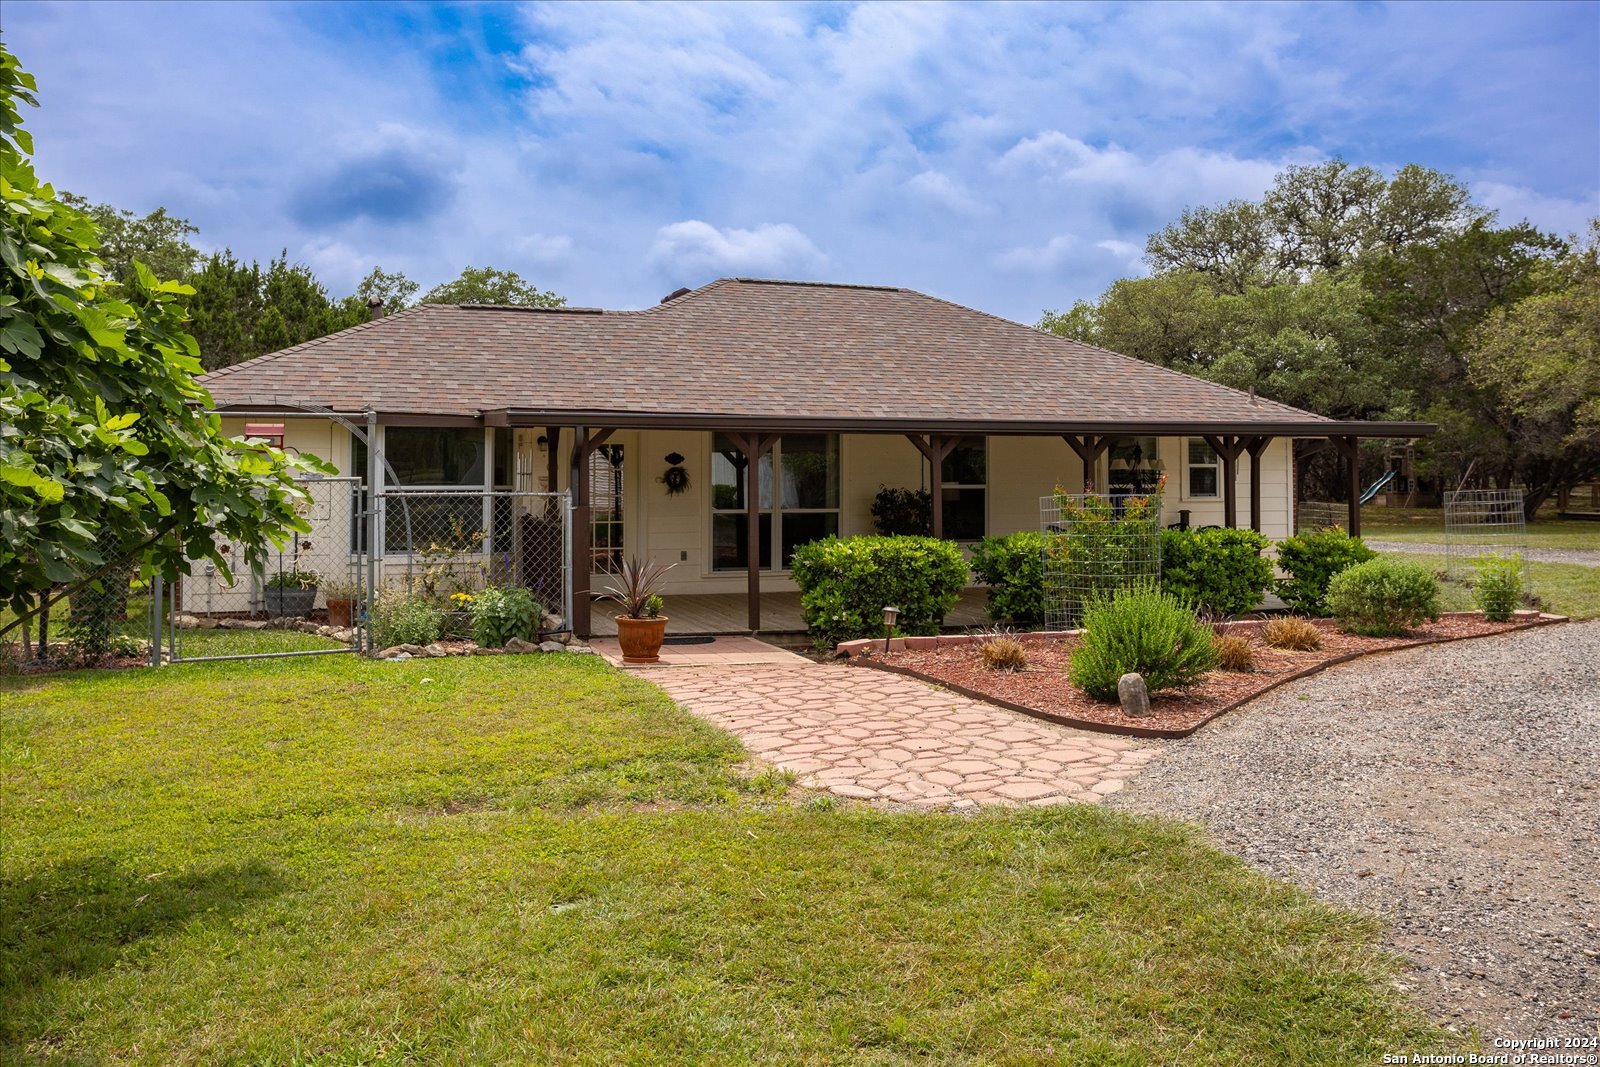 Photo of 4853 English Crossing Rd in Pipe Creek, TX